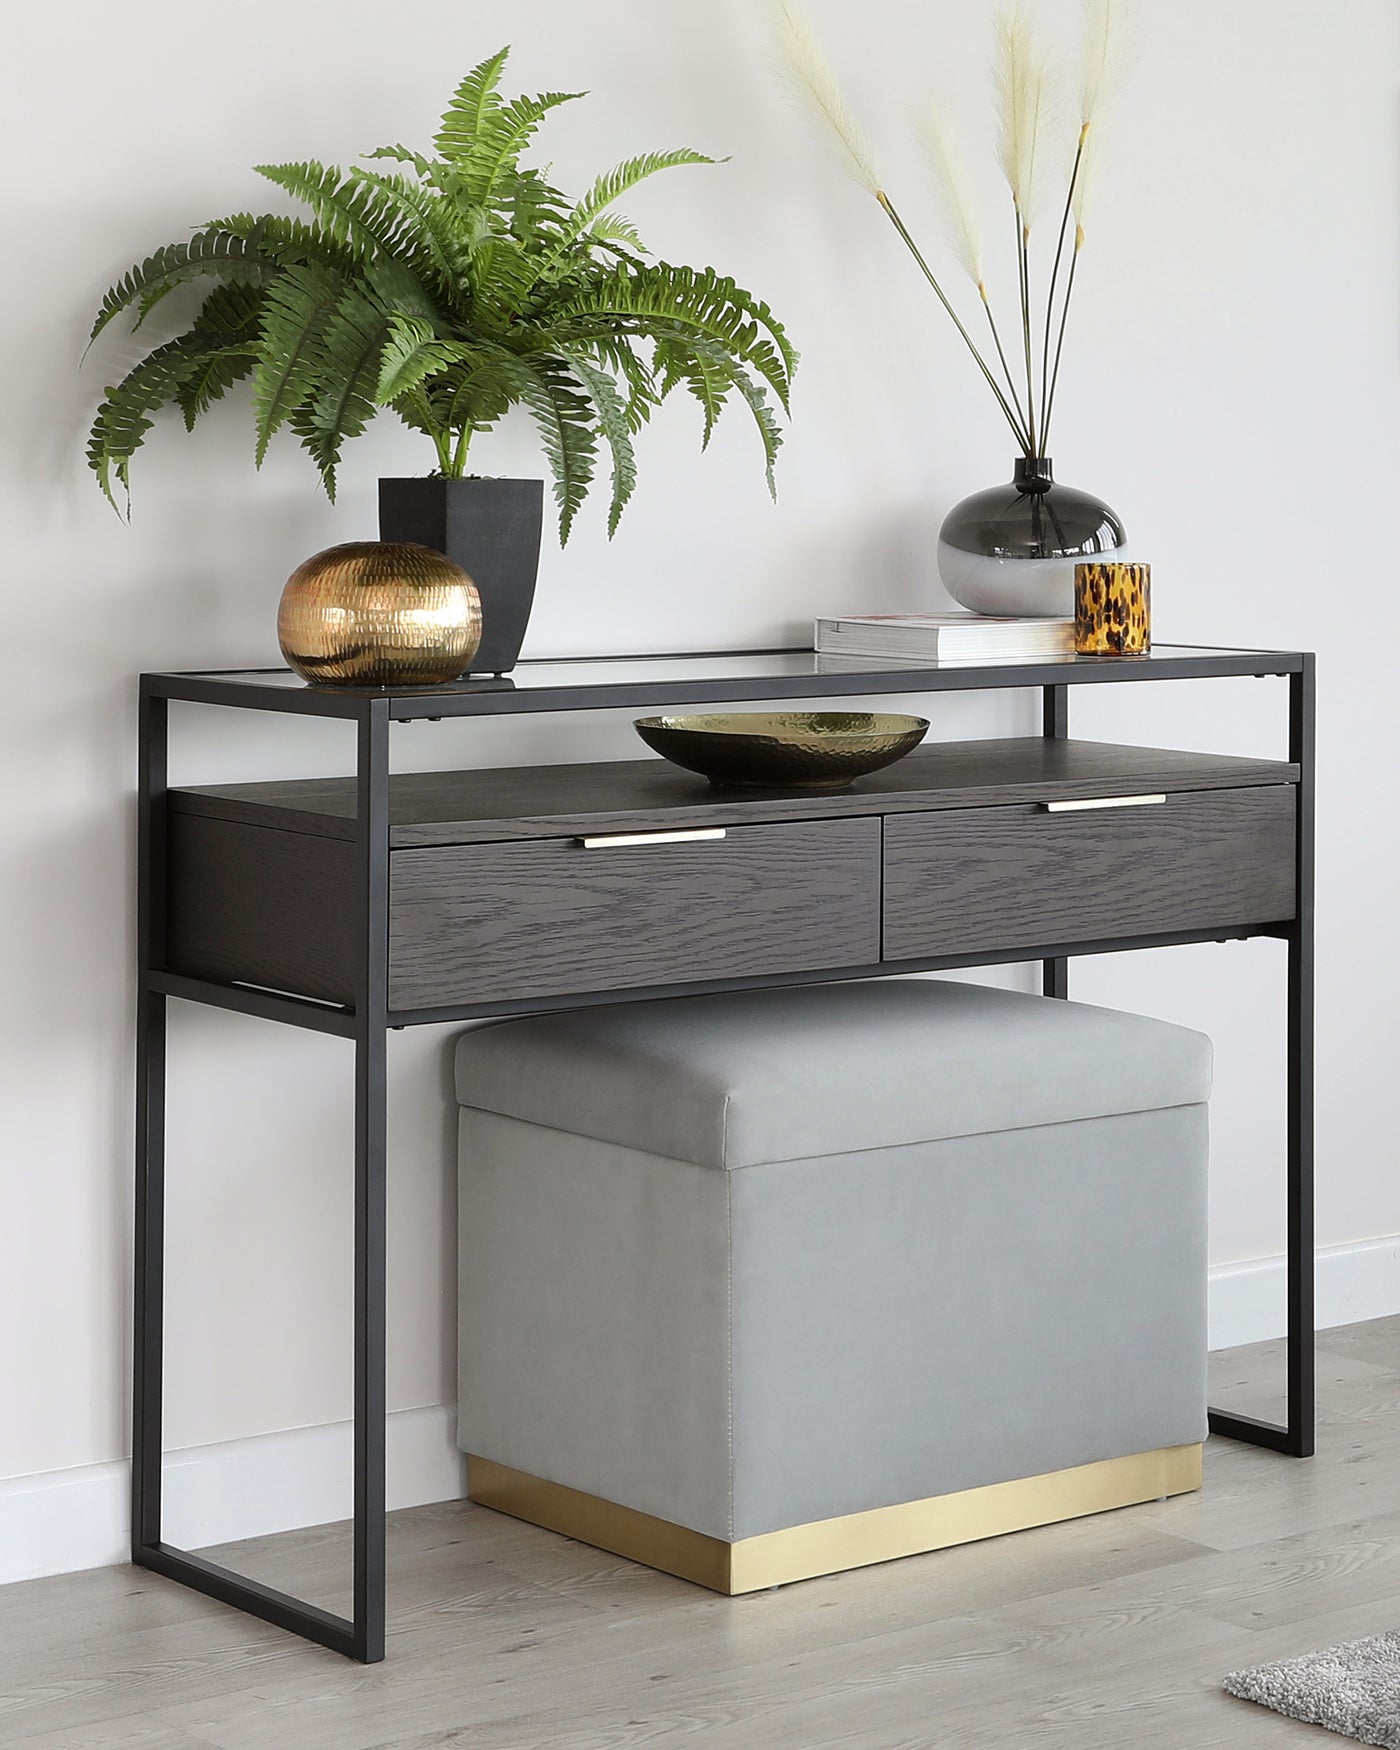 A modern console table with a sleek black metal frame and dark wood grain finished drawers, paired with a light grey upholstered ottoman featuring a gold metal base.